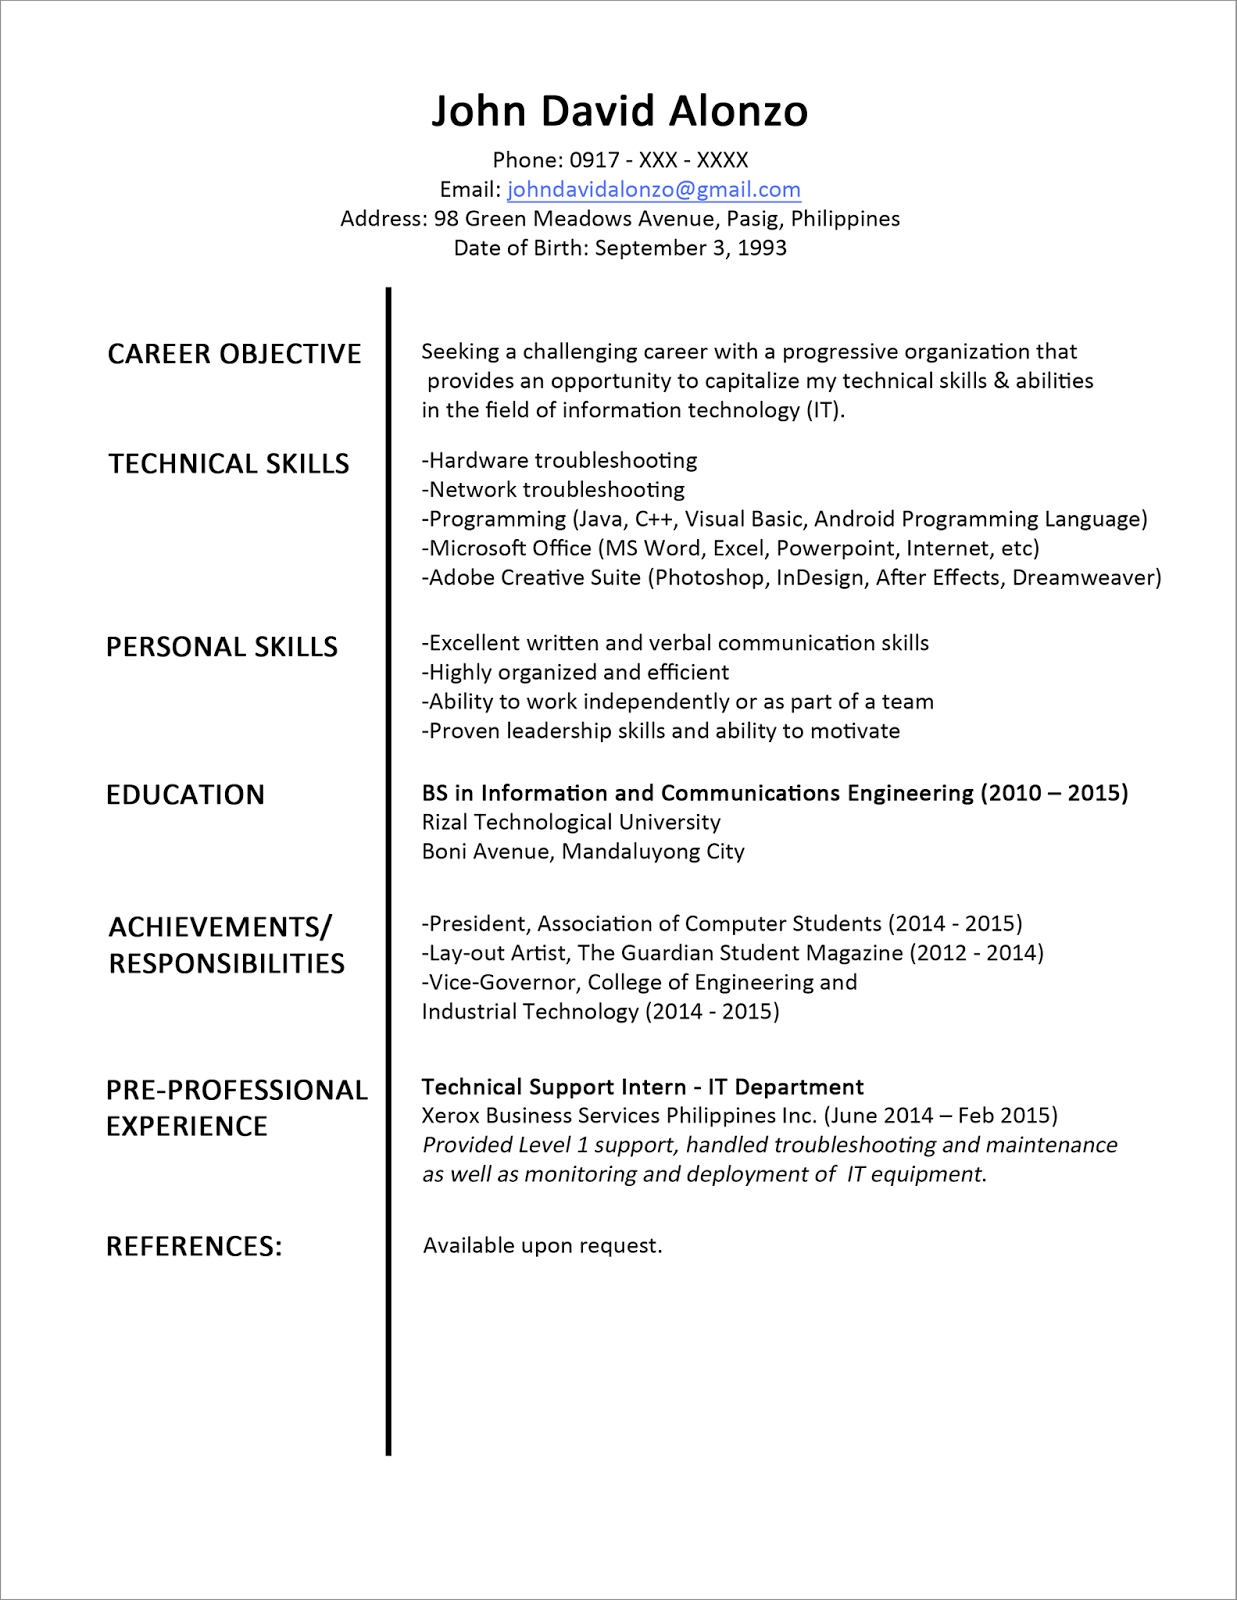 Resume template fashion industry